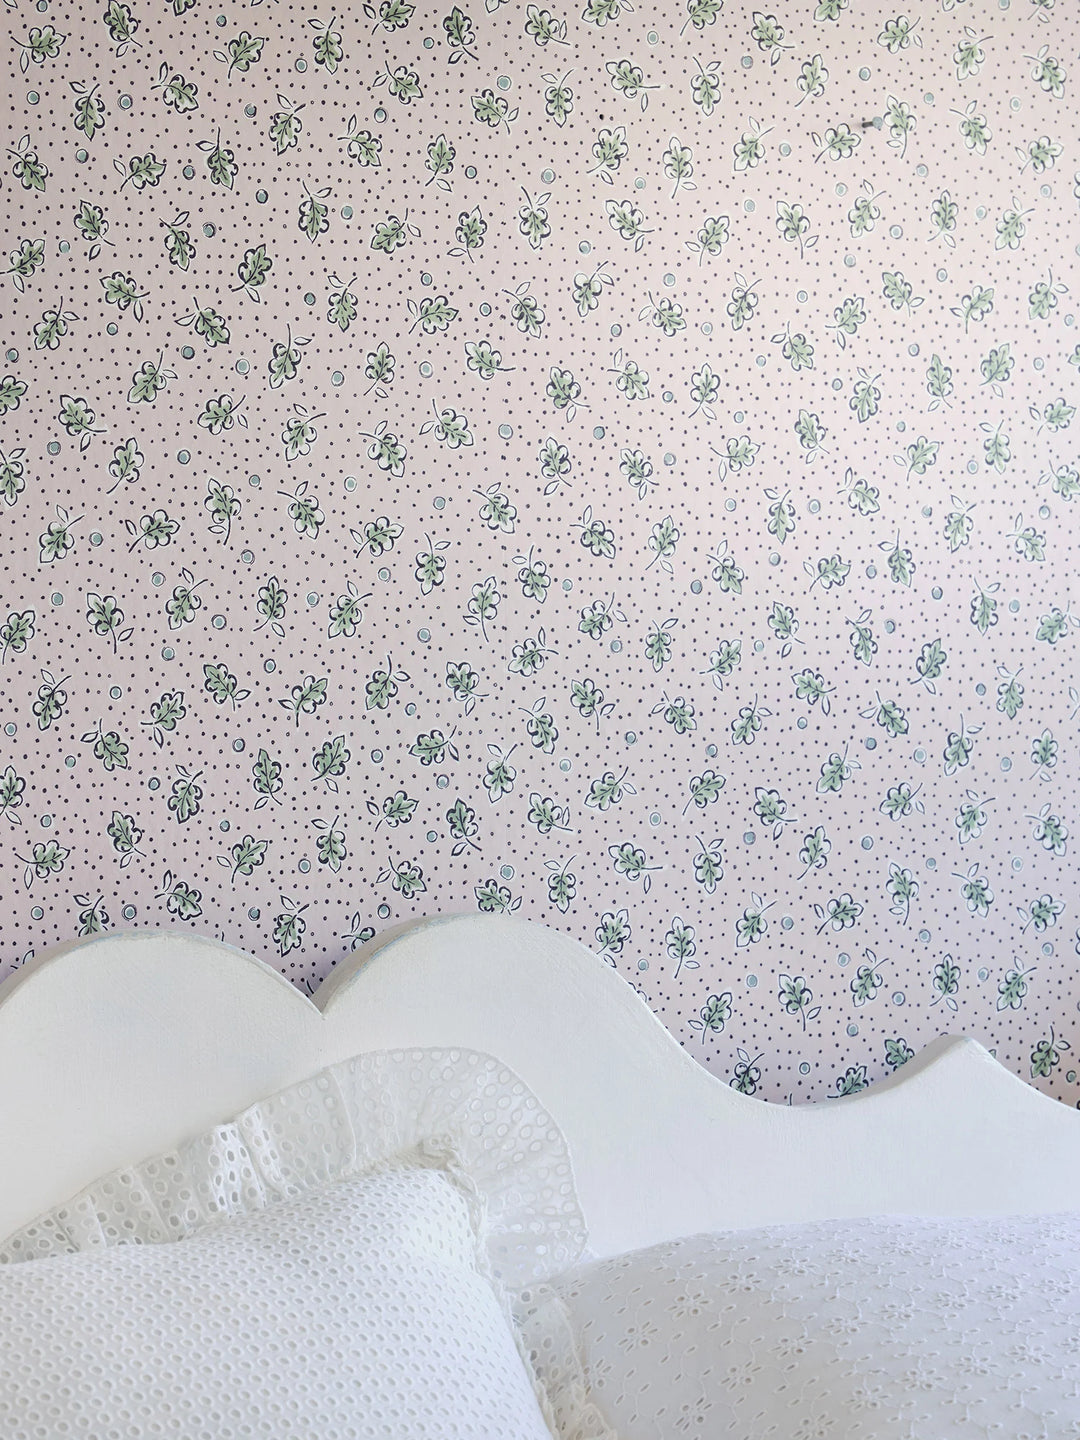 mille-feuilles-wallpaper-clay-pink-dainty-leaves-dots-bedroom